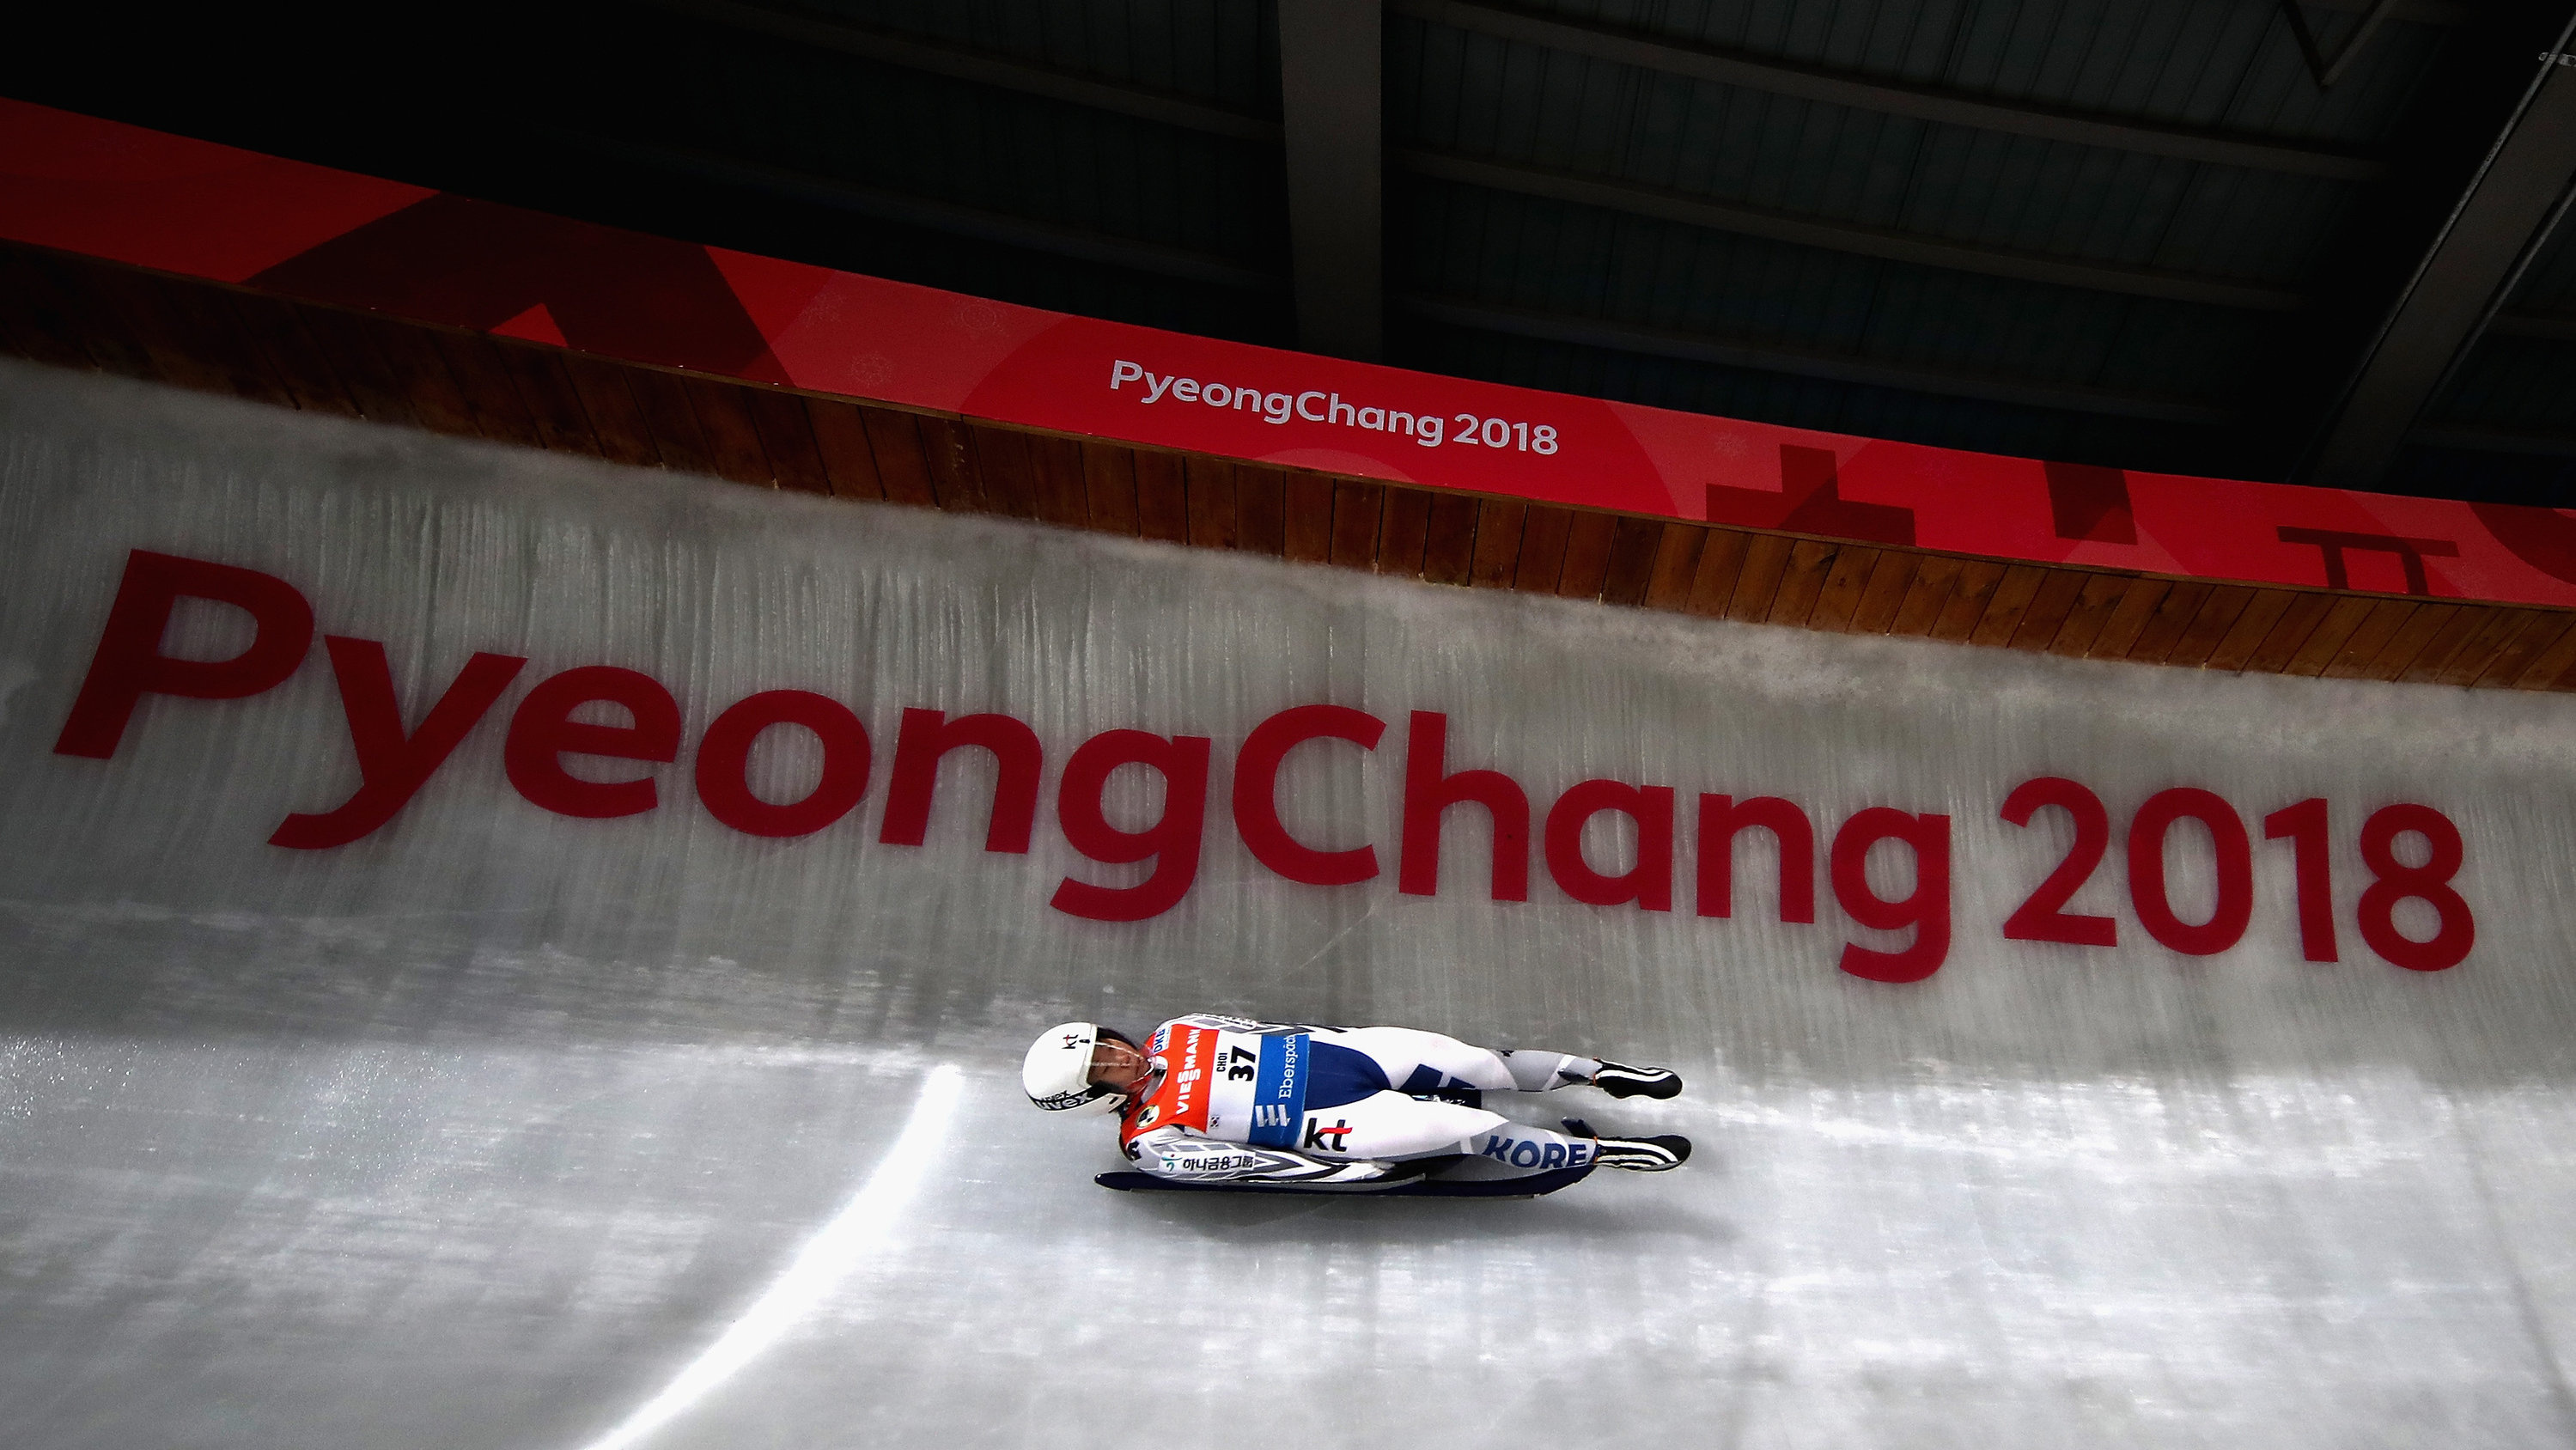 Luge: A luger slides down the track at the 2018 PyeongChang Winter Olympics. 3000x1690 HD Background.